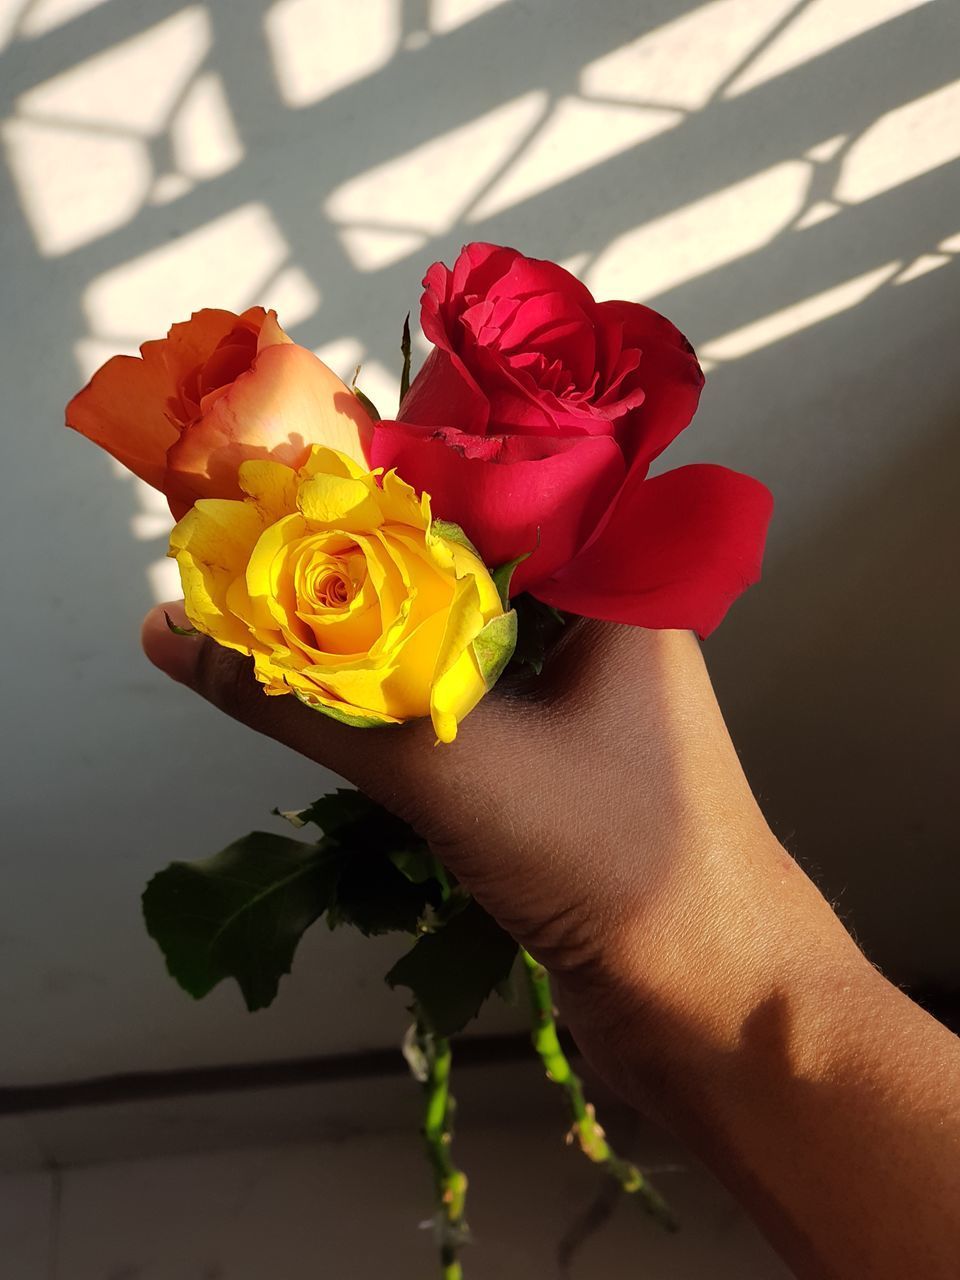 CLOSE-UP OF HAND HOLDING RED ROSE